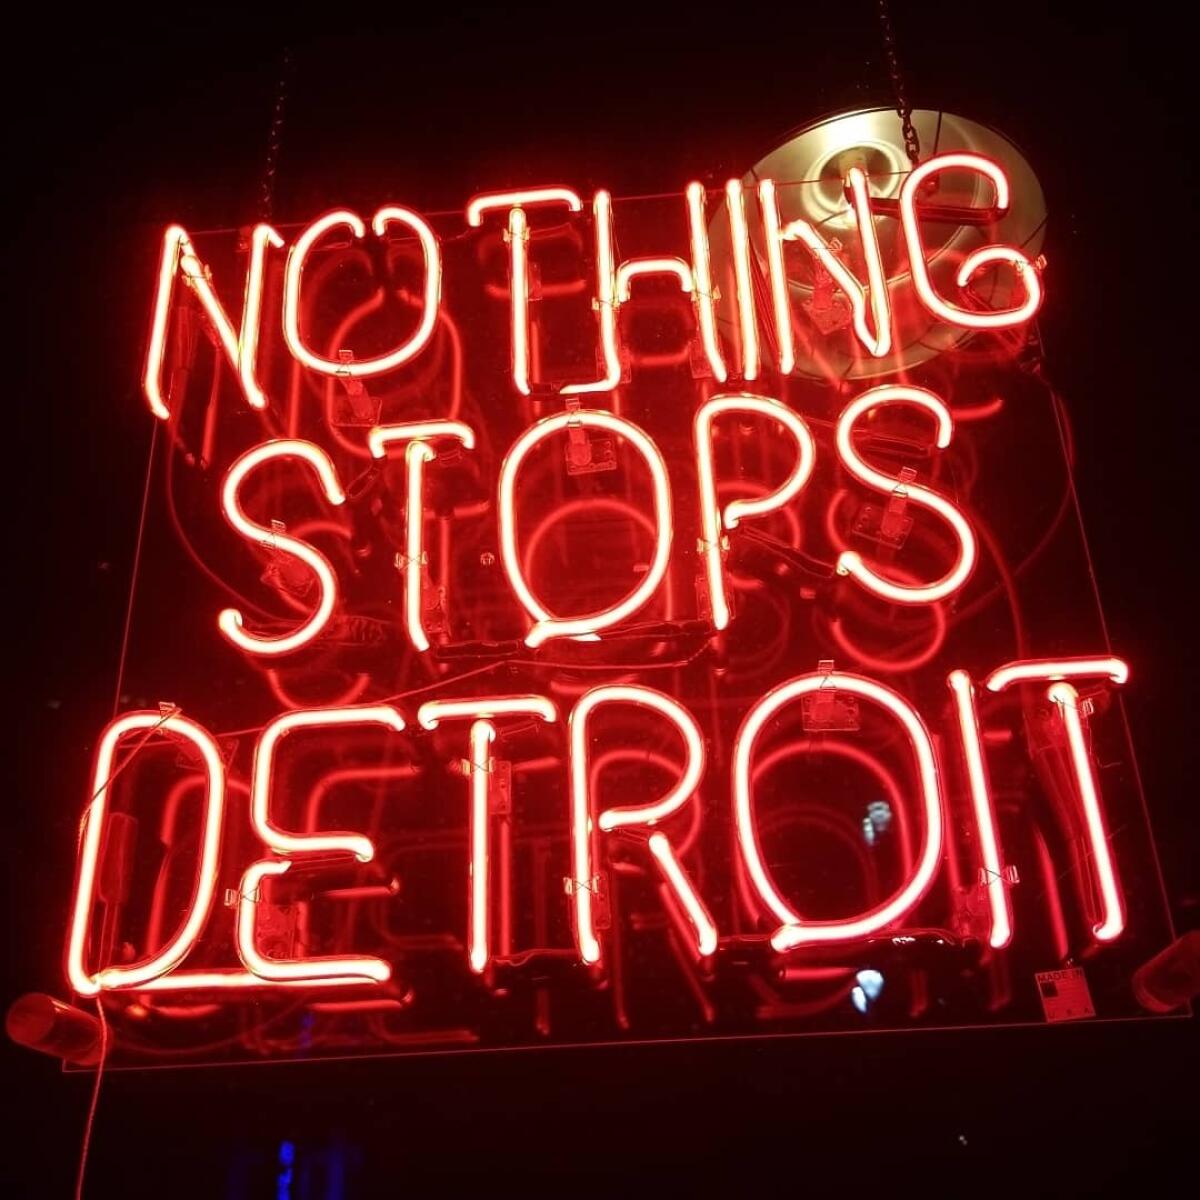 A sign declaring "Nothing stops Detroit" hangs in a storefront along Woodward Avenue in downtown Detroit, one of many signs and murals aimed at lifting the spirits of locals in the economically depressed city.